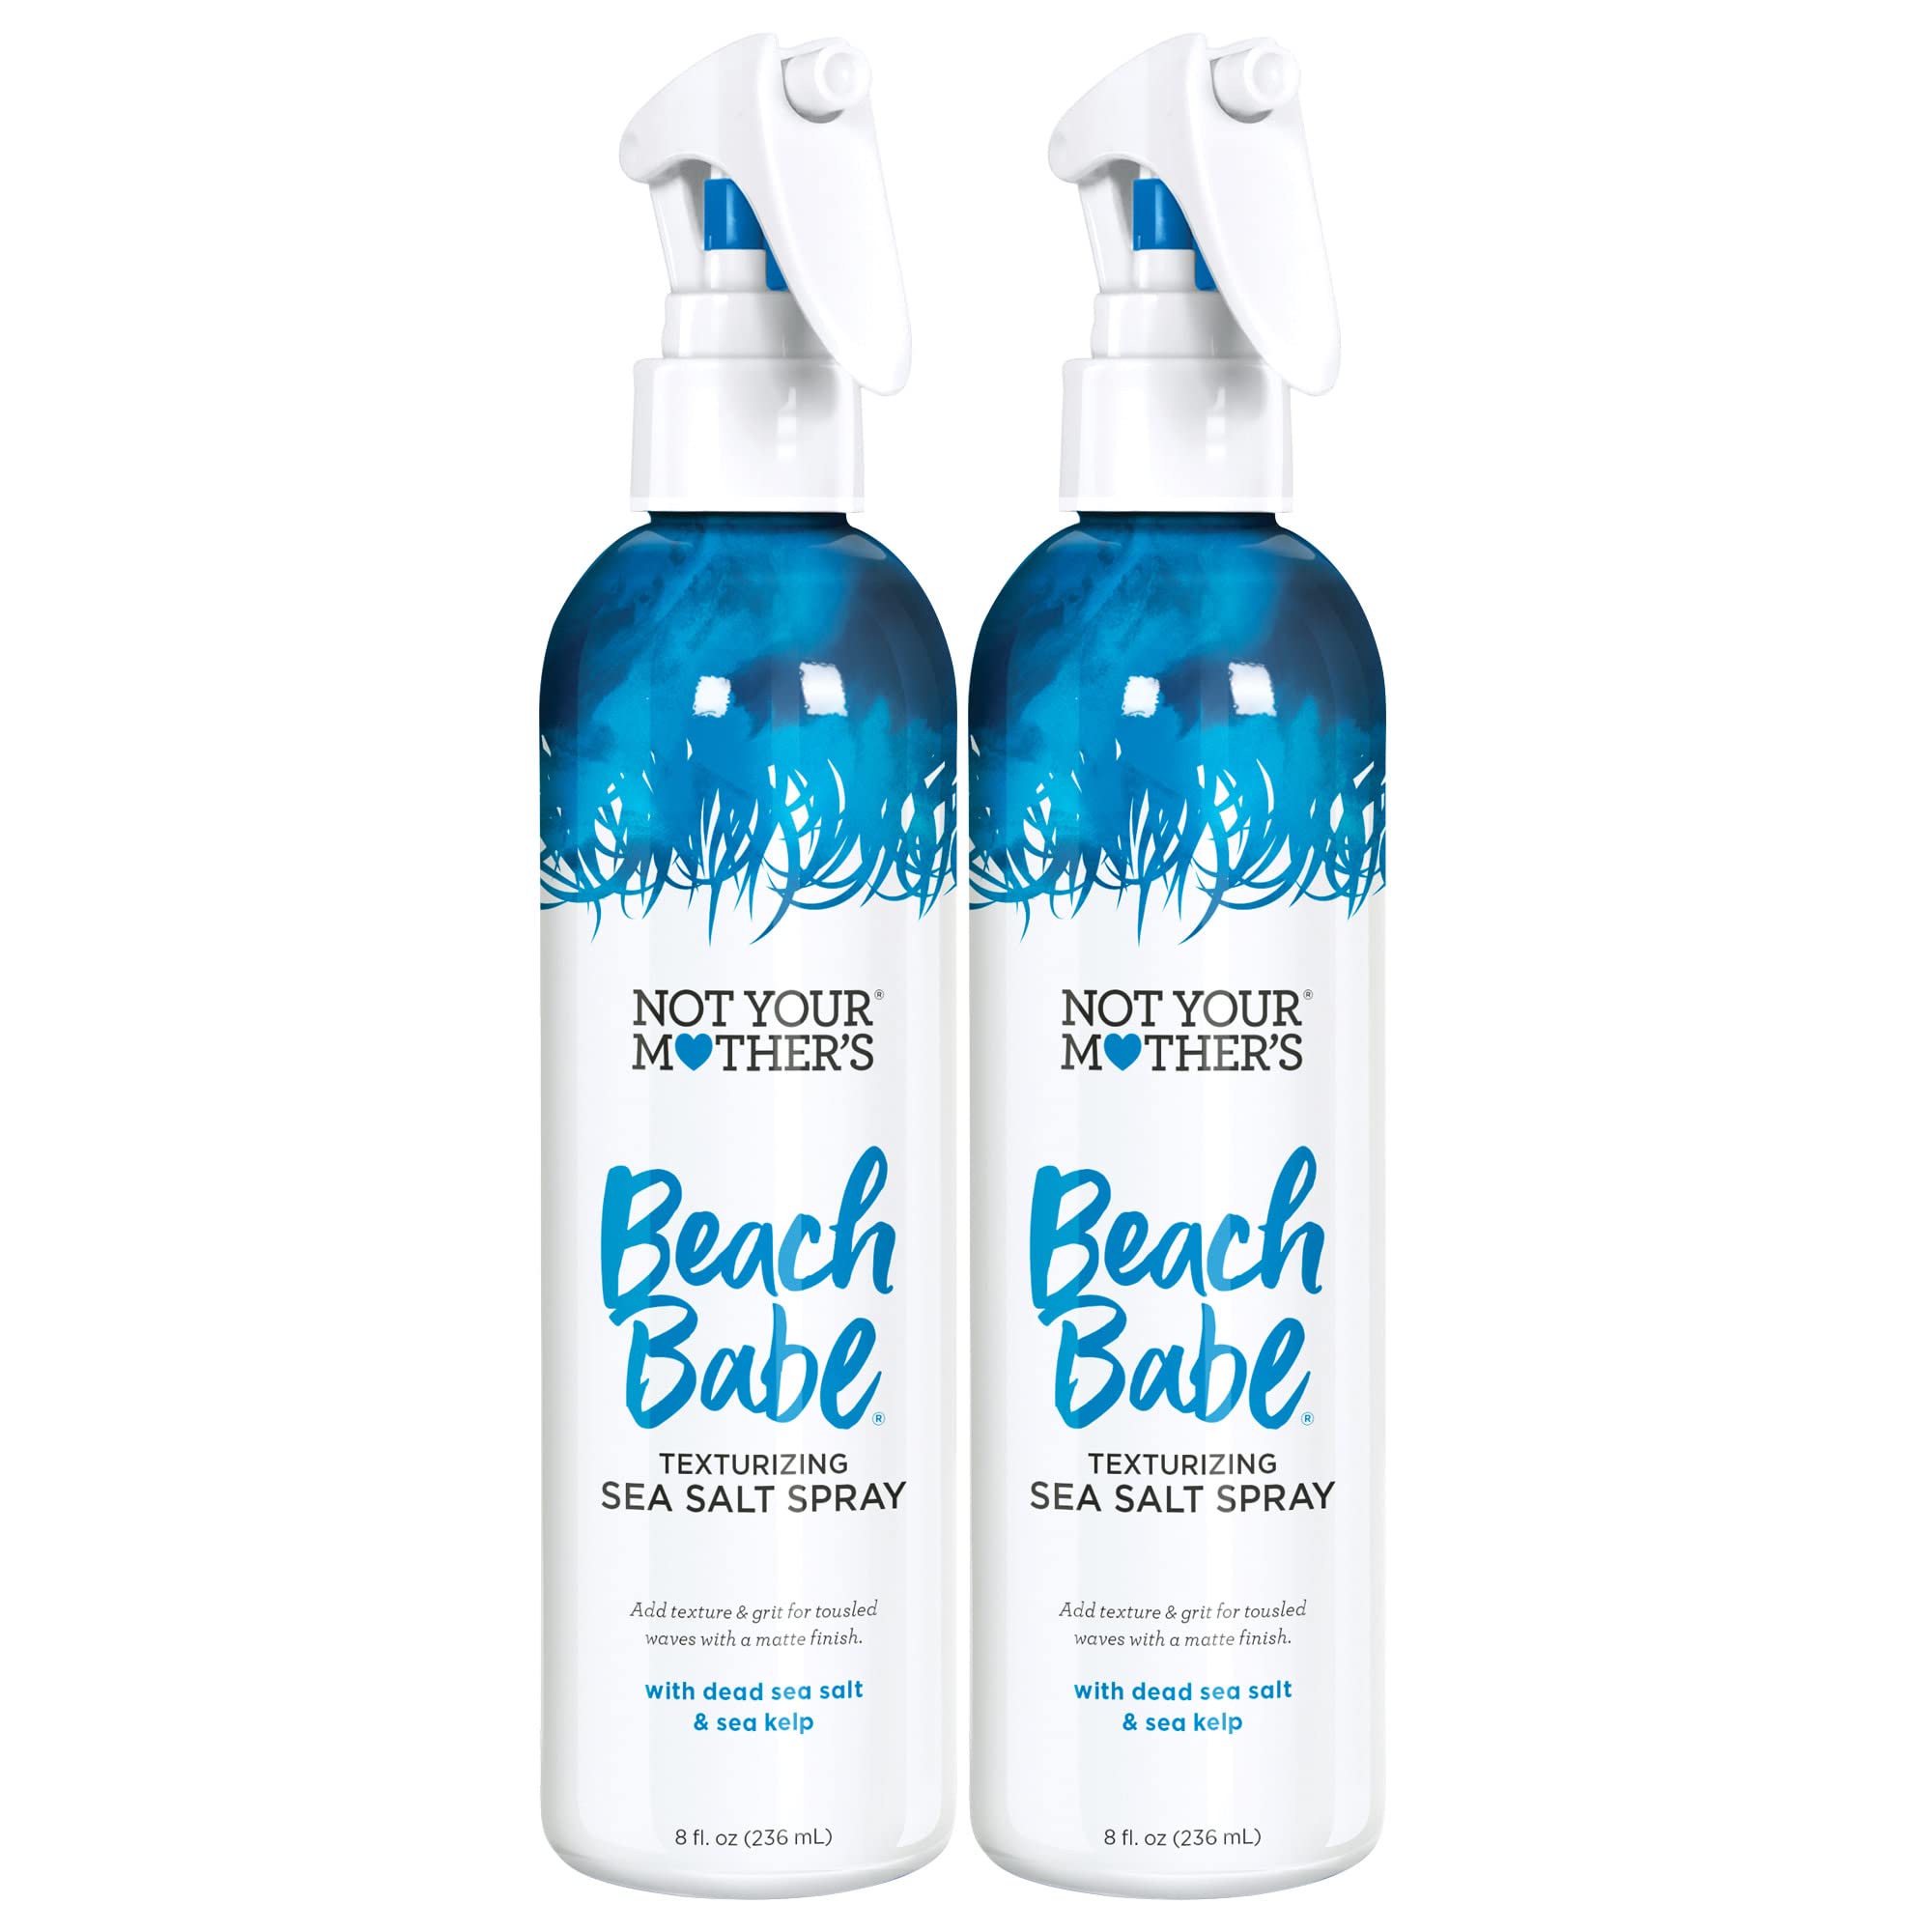 Mua Not Your Mother's Beach Babe Sea Salt Spray (2-Pack) - 8 fl oz - Spray  for Tousled Hair - Add Texture and Grit to Hair with a Matte Finish trên  Amazon